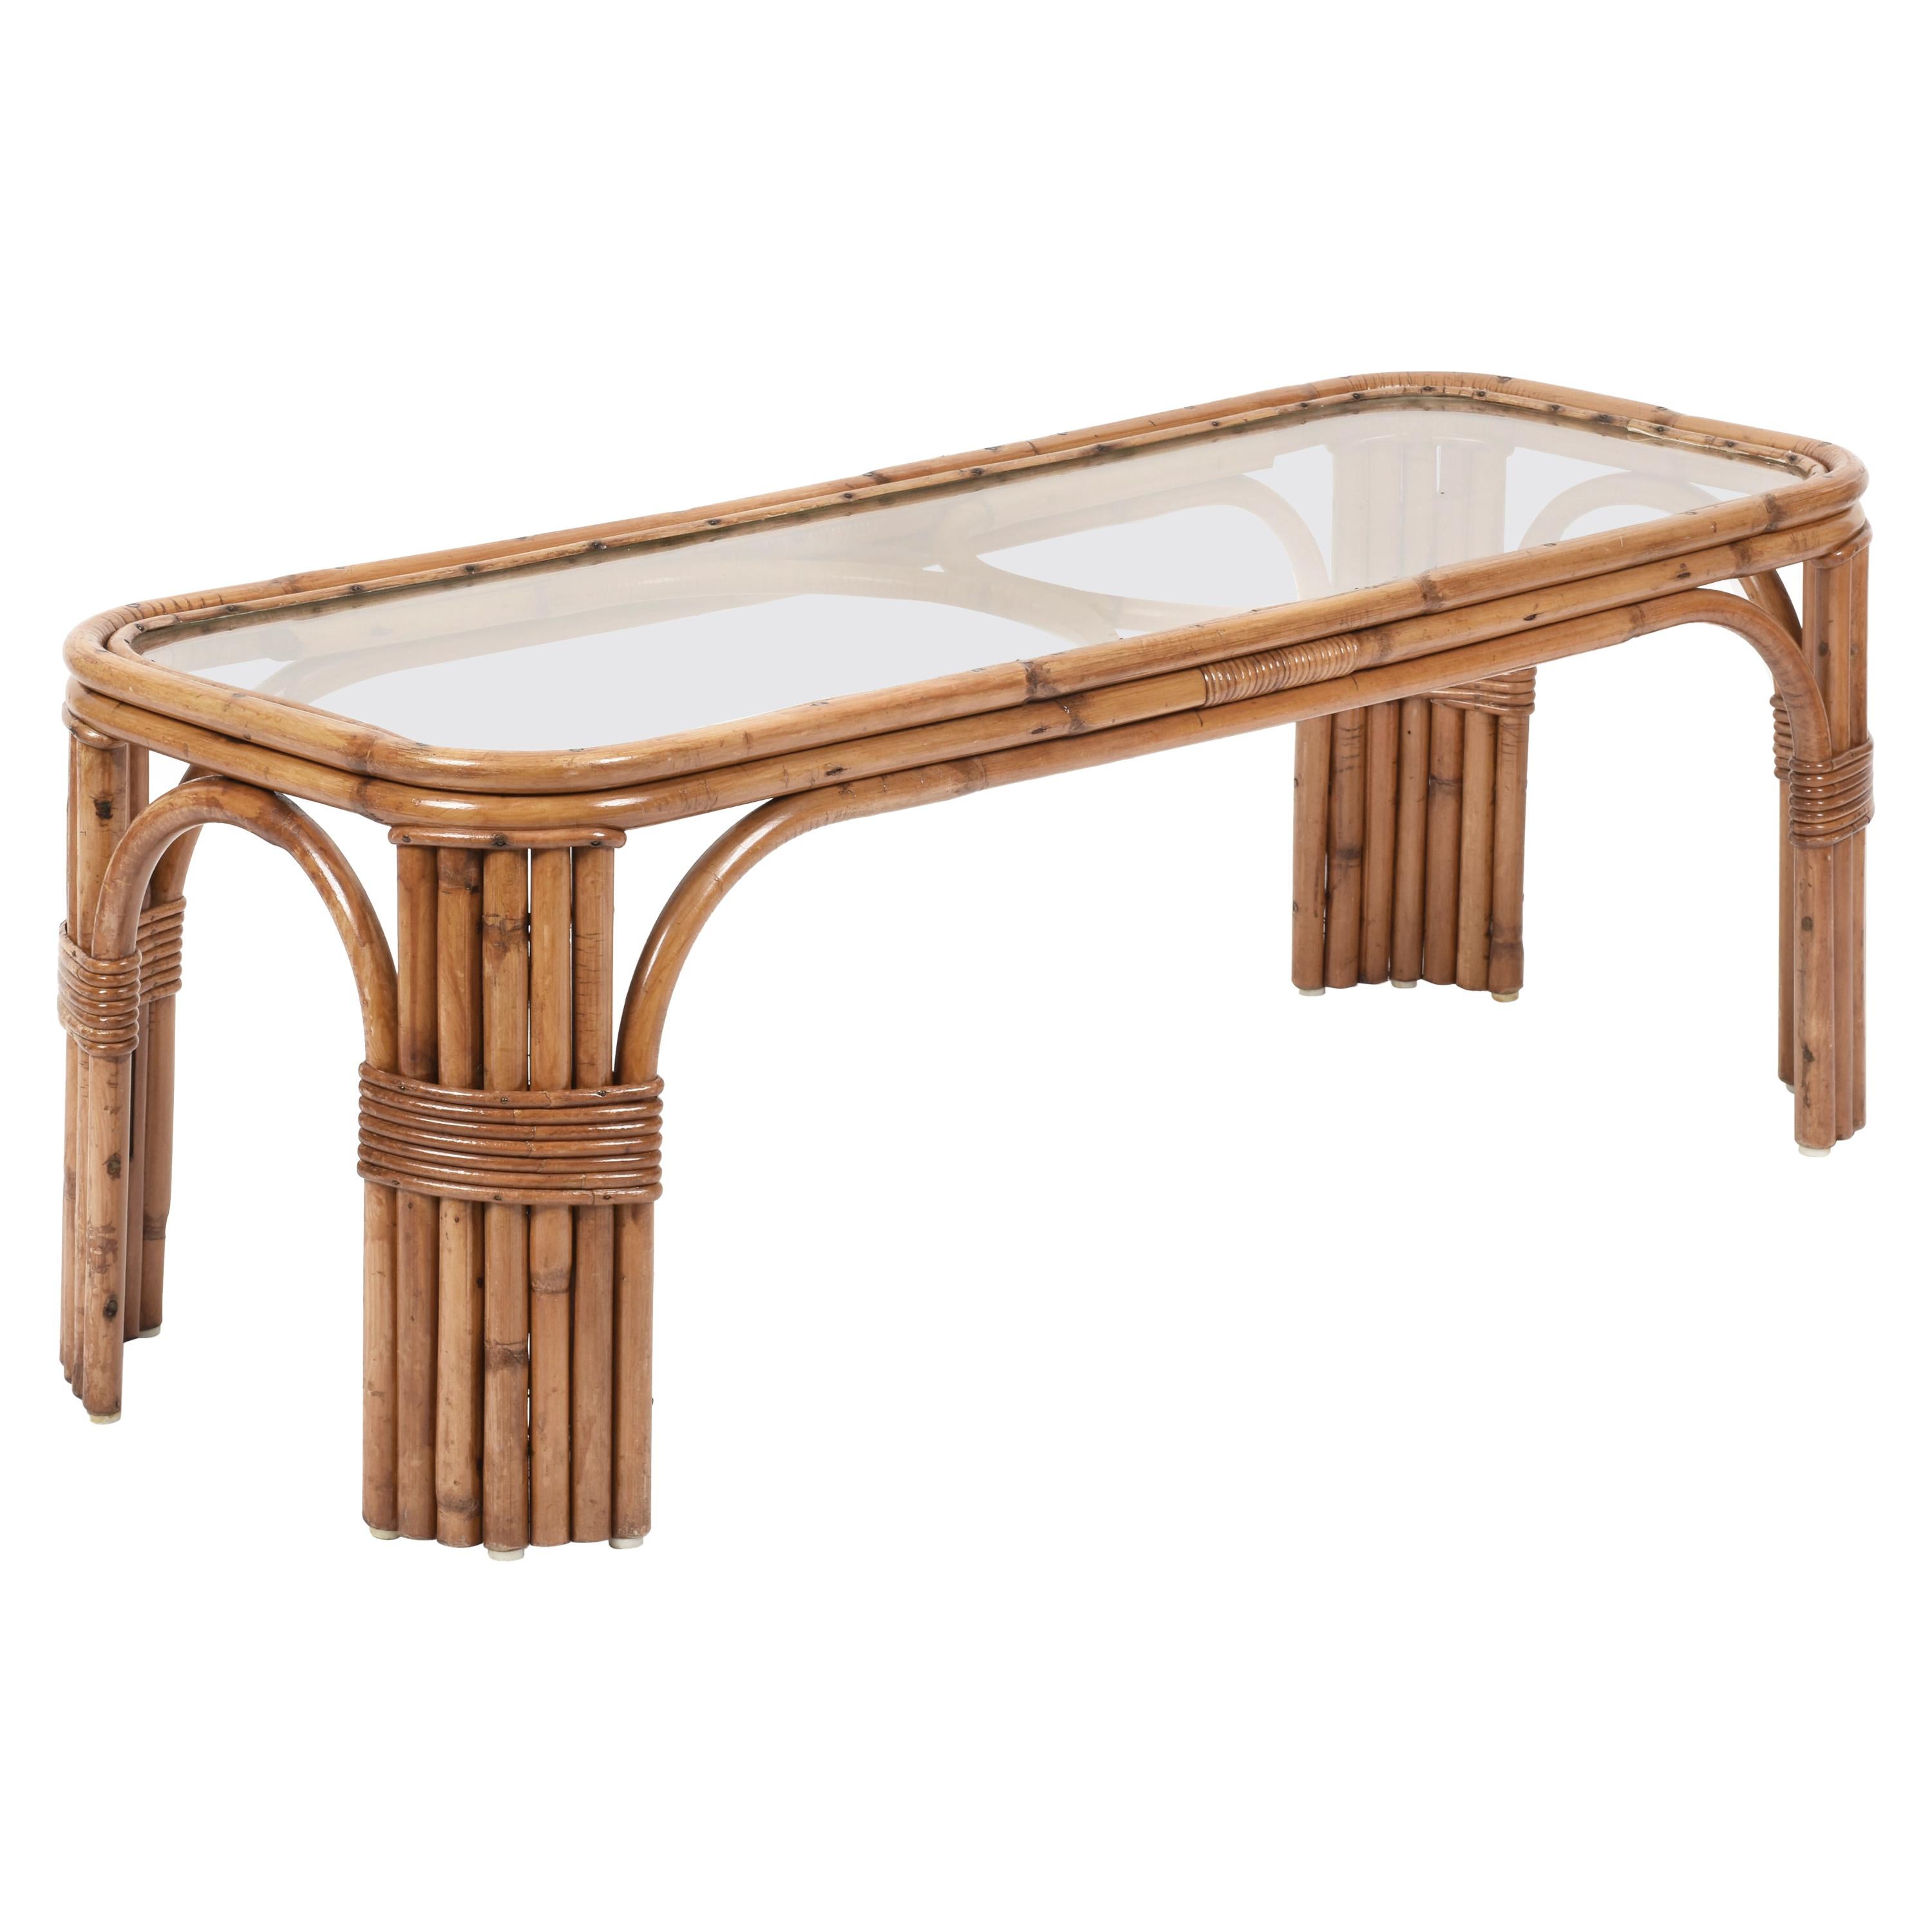 Midcentury Bamboo and Rattan Italian Rectangular Coffee Table with Glass Top